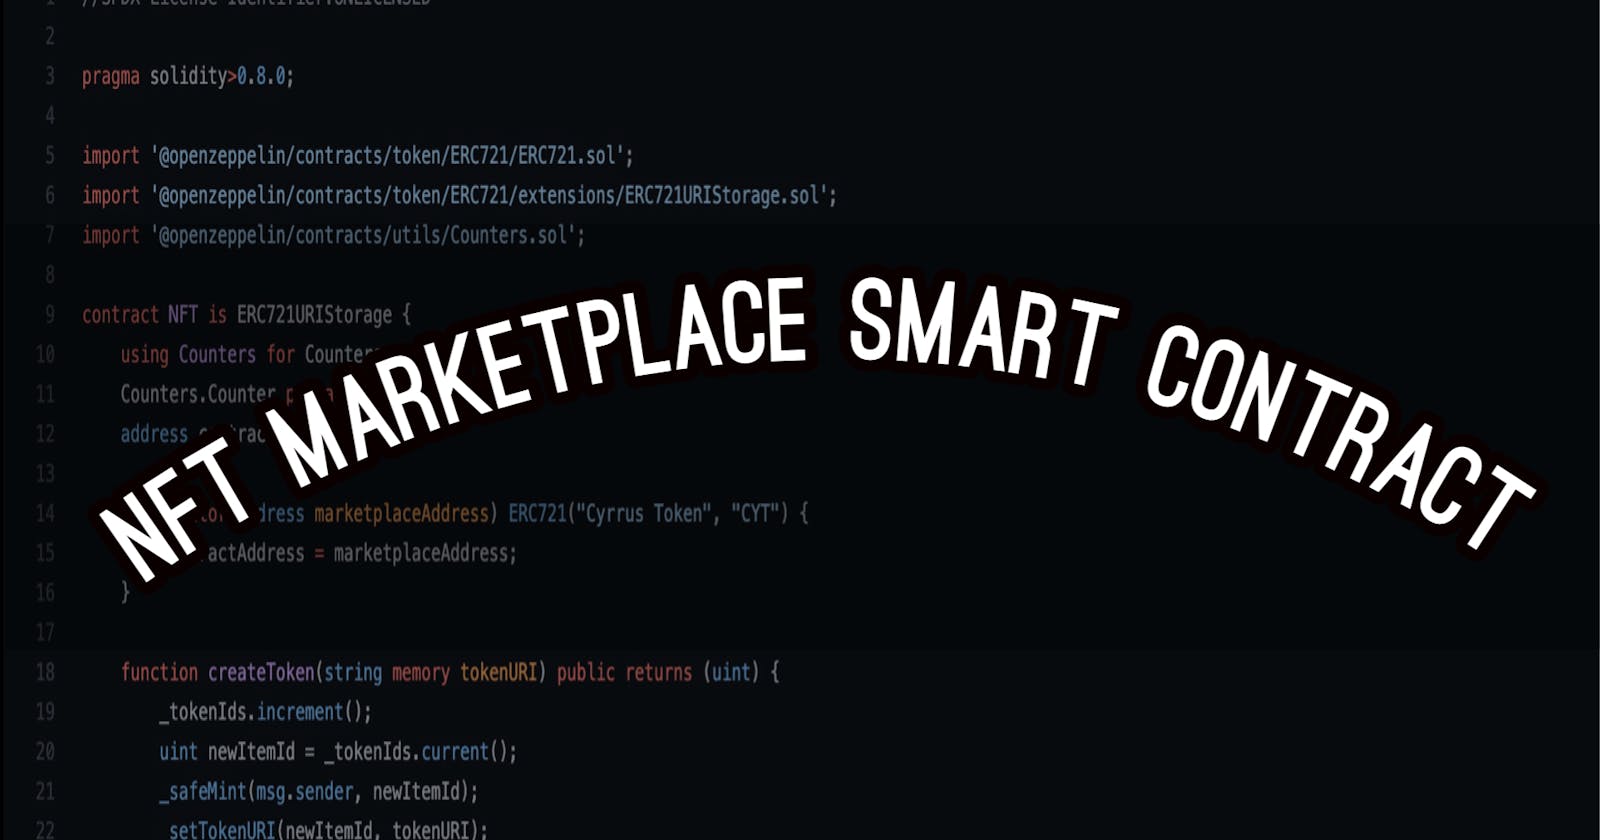 Build a smart contract for an NFT marketplace